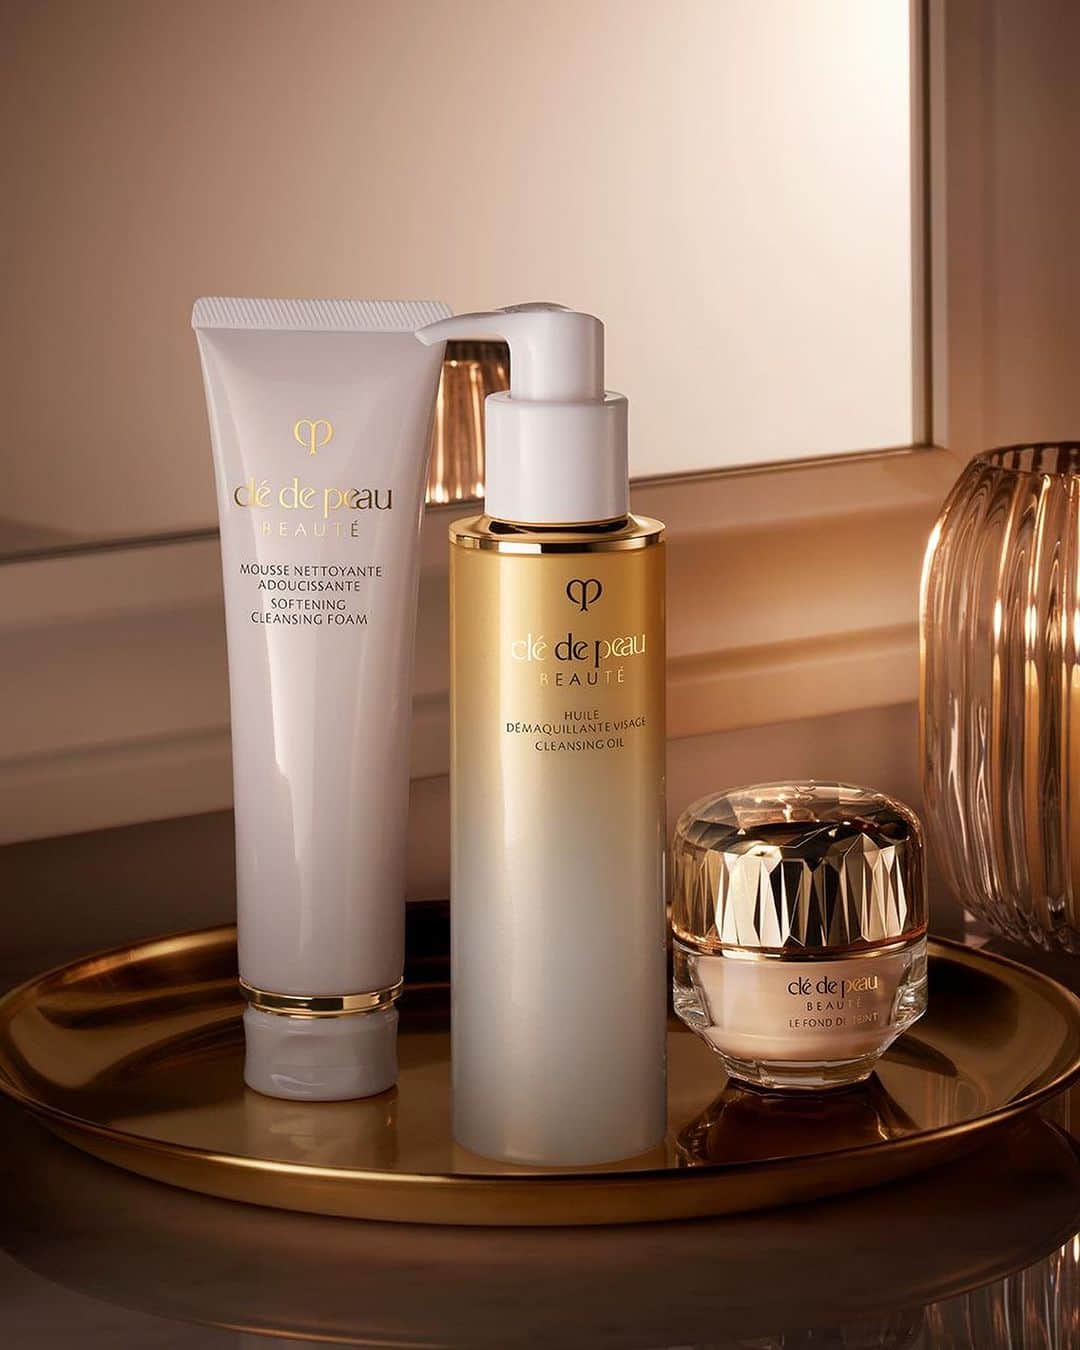 Clé de Peau Beauté Officialさんのインスタグラム写真 - (Clé de Peau Beauté OfficialInstagram)「Preparing your skin before applying makeup is just as important as creating a smooth base with #TheFoundation.  Start your day with the #KeyRadianceCare routine before you apply The Foundation. In the evenings, be sure to cleanse thoroughly with the #CleansingOil to dissolve impurities and makeup. Follow up by washing your face with the #SofteningCleansingFoam, which is enriched with amino acids to gently cleanse your face and leave your skin deeply nourished and moisturized.   クレ・ド・ポー ボーテ #ルフォンドゥタンｎ でハリのある輝きと立体感のある顔立ちを演出するには、メイク前のお肌の準備も重要です。  ル・フォンドゥタンｎを塗る前に、 #キーラディアンスケア の習慣で１日をスタートさせましょう。 夜は、クレ・ド・ポー ボーテ #ユイルデマキアントヴィサージュ でしっかりクレンジングし、ウォータープルーフのメイクアップや毛穴の汚れまでしっかりと取り除きます。 その後、うるおい成分*や天然由来のアミノ酸を含んだ、吸いつくように濃密な泡が肌を優雅に包み込み、しっとりとした肌に洗い上げる洗顔フォーム、クレ・ド・ポー ボーテ #ムースネトワイアントＡｎ で洗い上げましょう。  *W ヒアルロン酸（ヒアルロン酸 Na、アセチルヒアルロン酸 Na)」10月18日 13時00分 - cledepeaubeaute